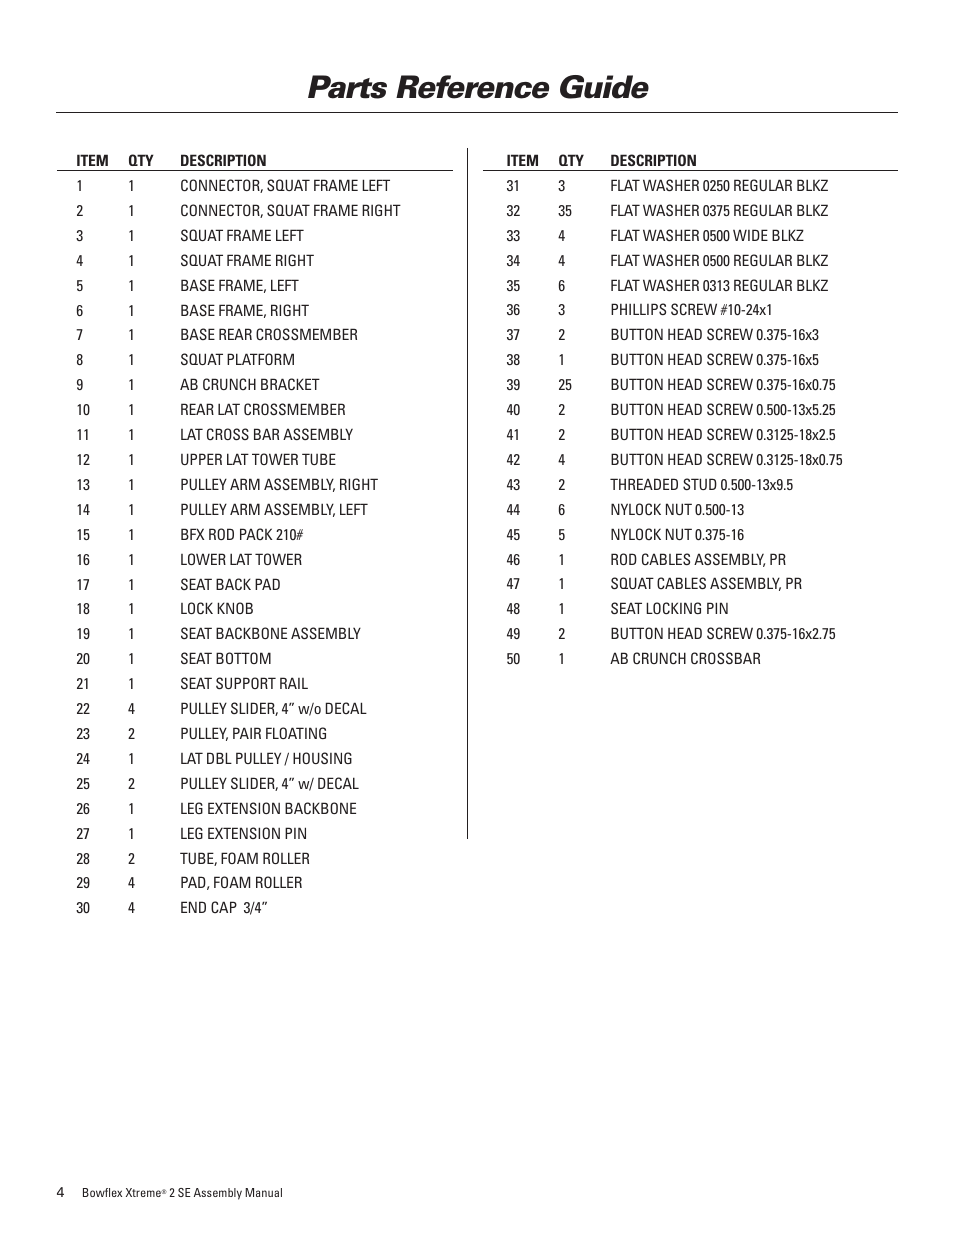 Parts reference guide | Bowflex Xtreme 2 SE User Manual | Page 8 / 28